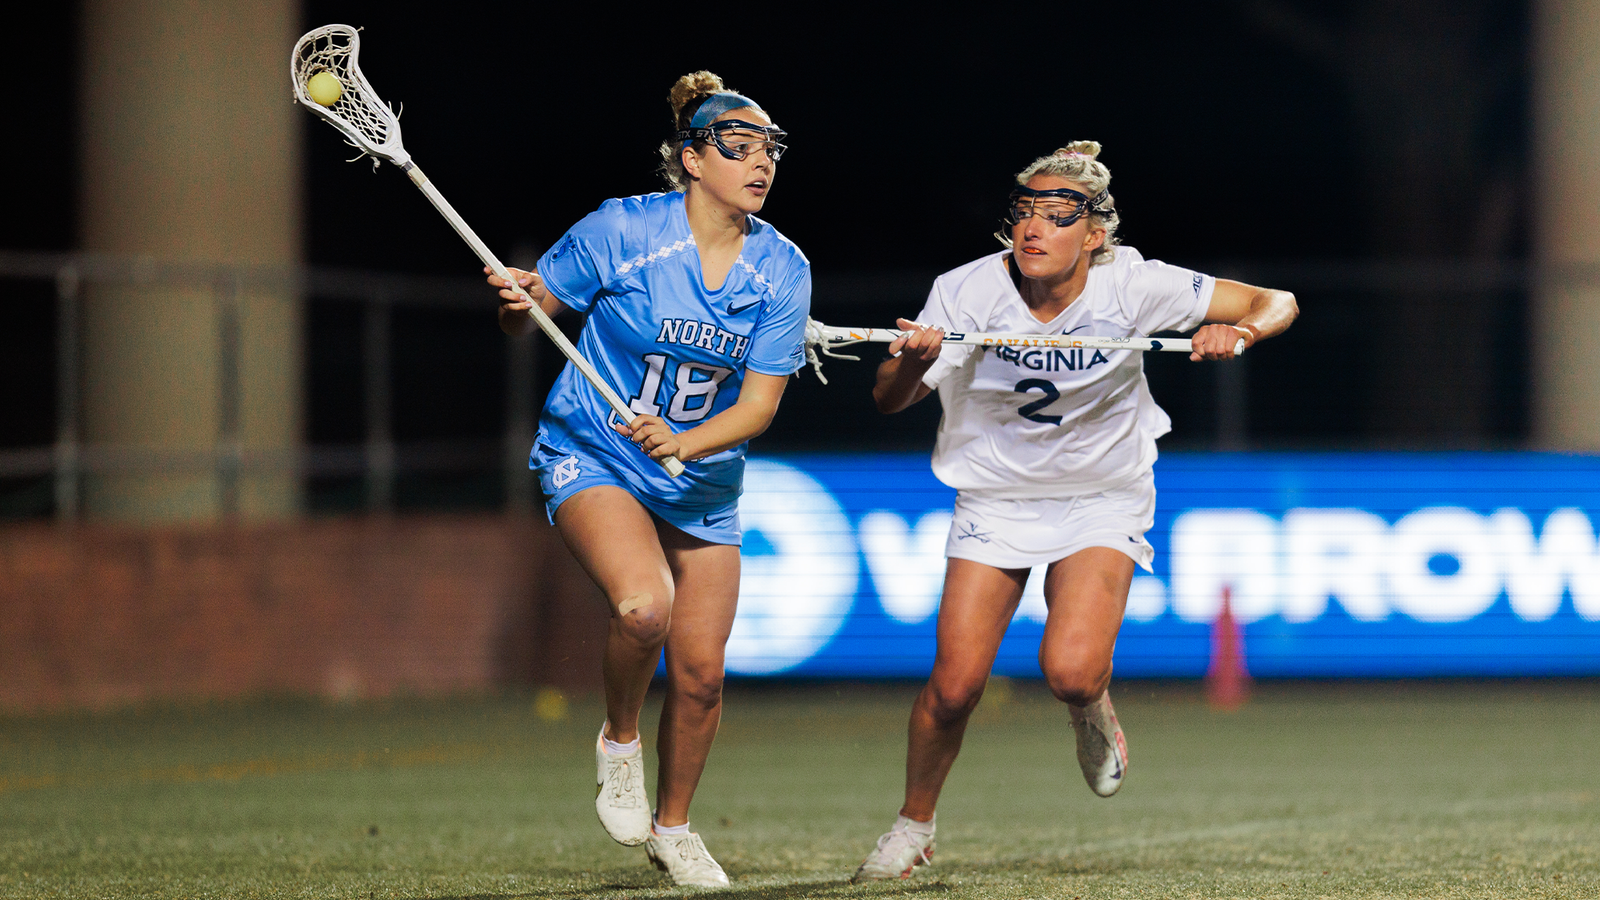 No. 14 UNC Women’s Lacrosse Takes On No. 6 Virginia In ACC Quarterfinals Wednesday